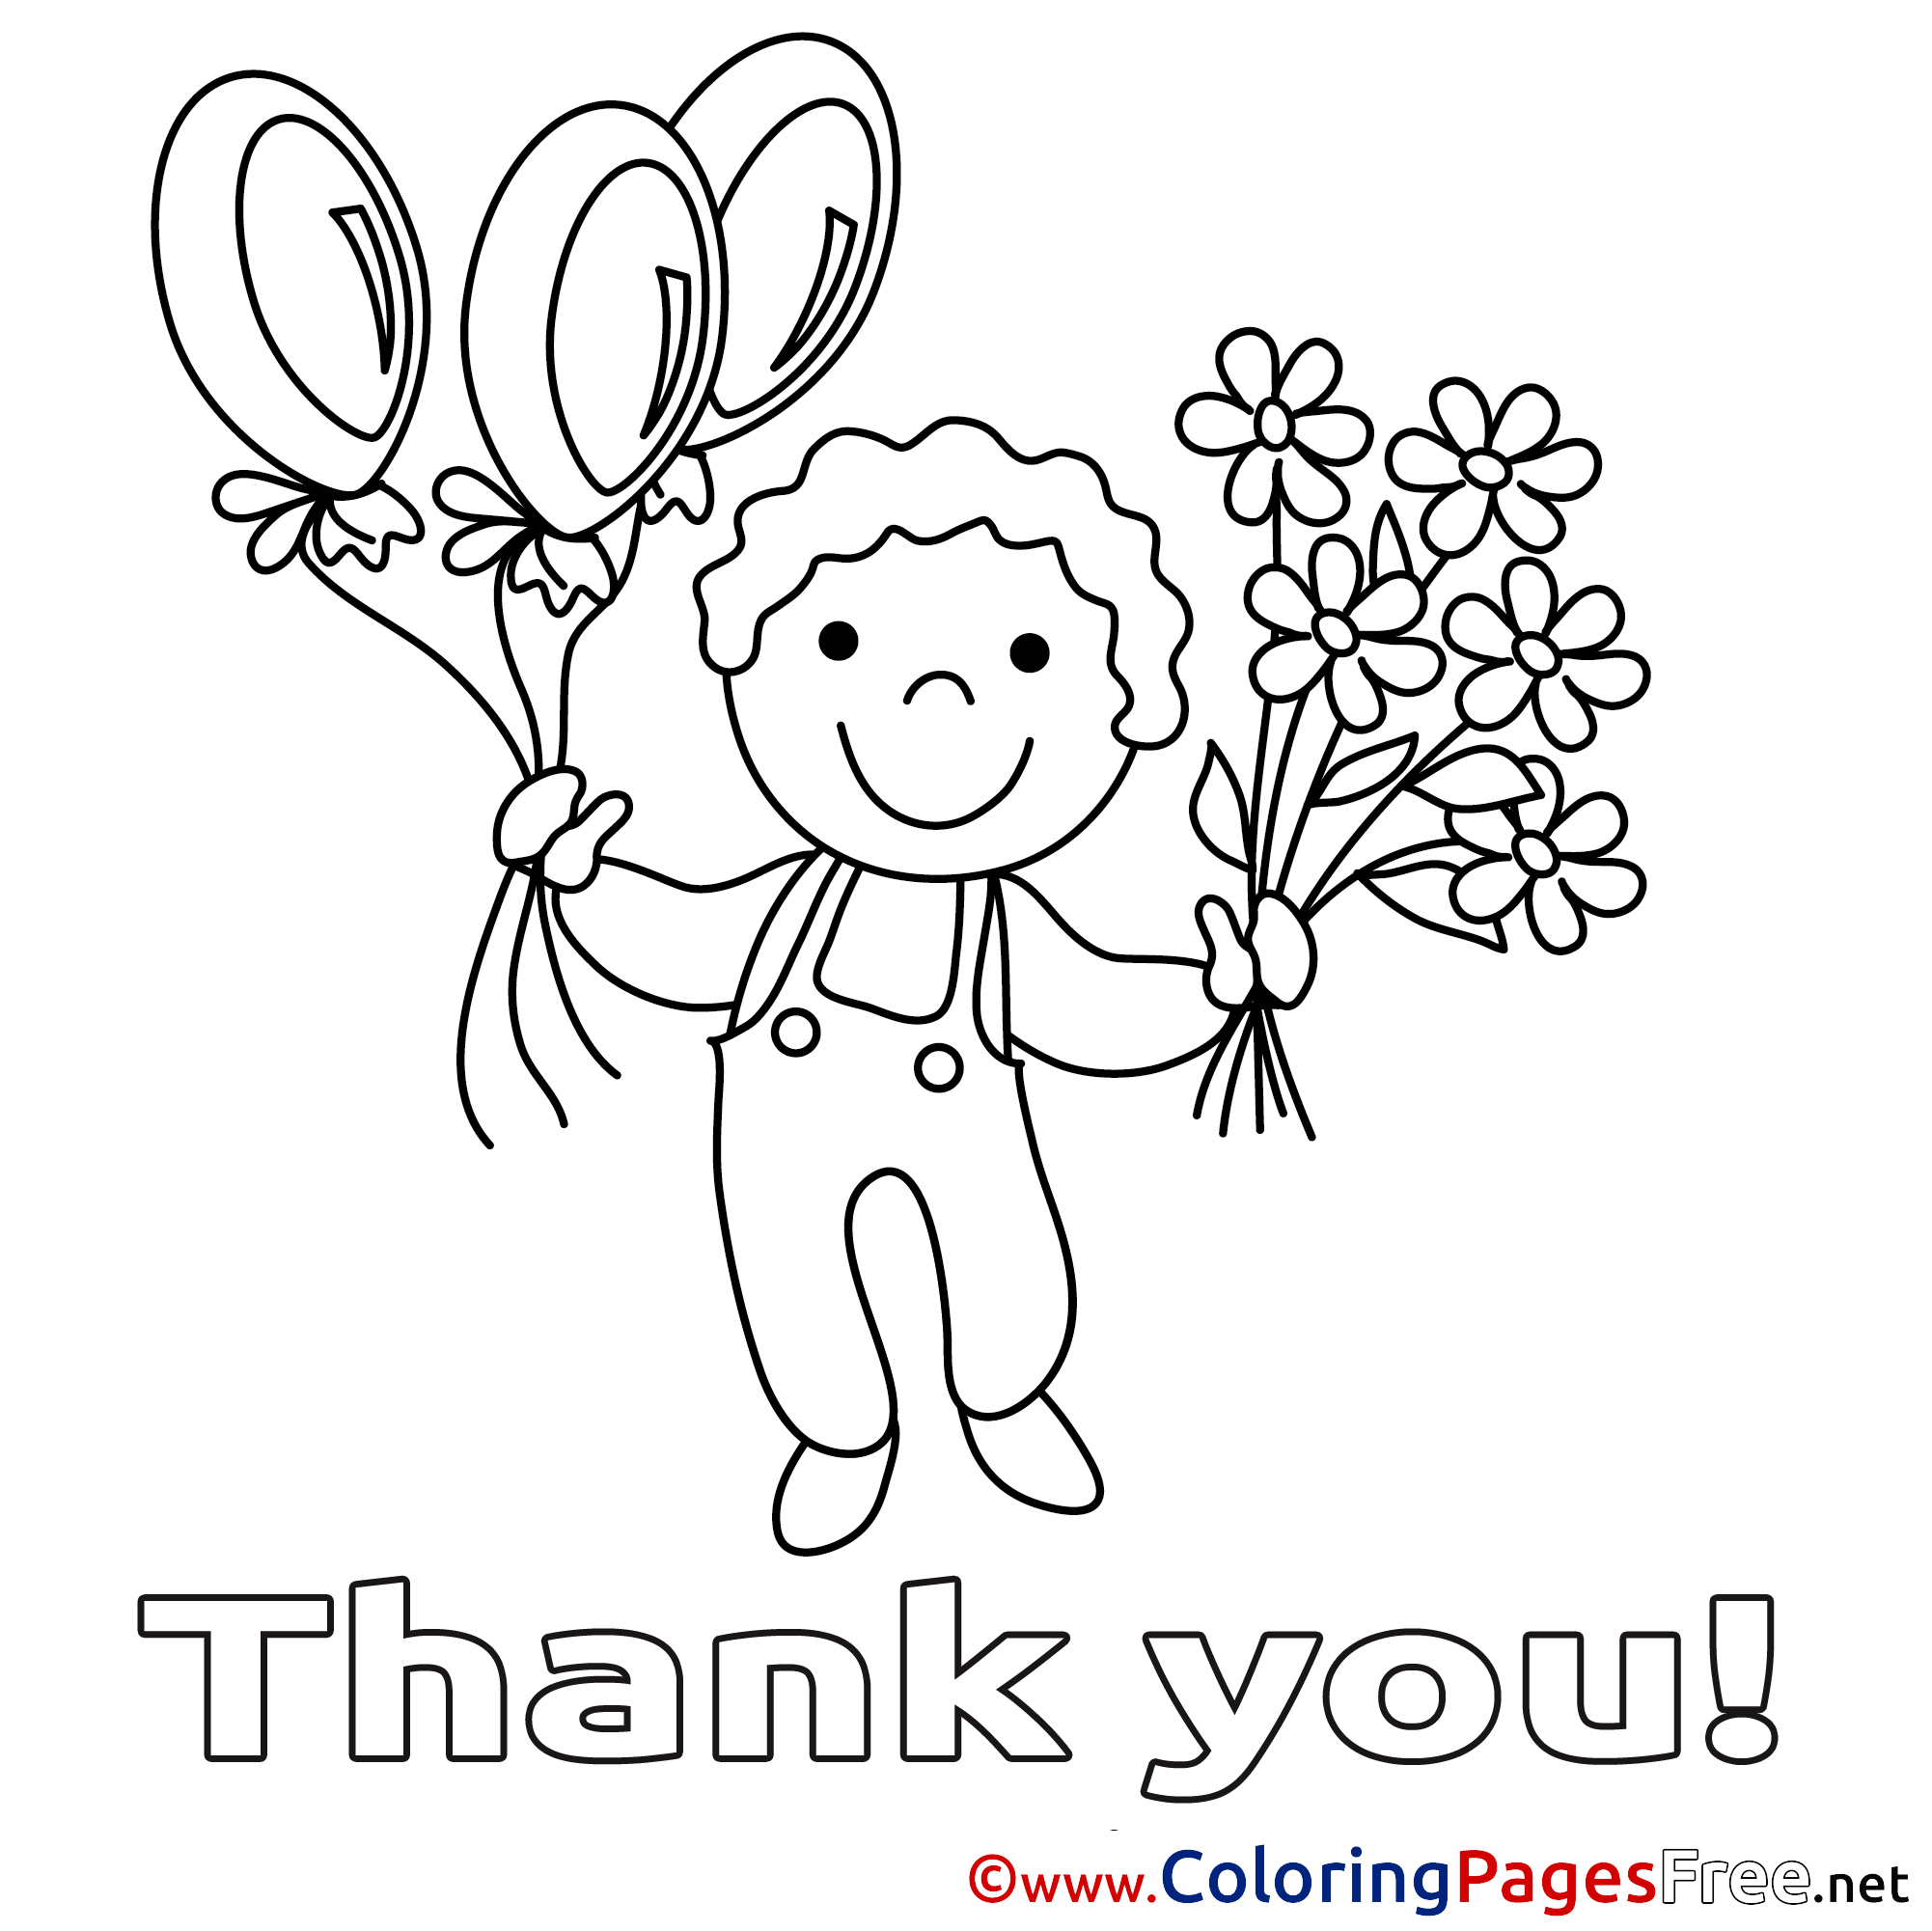 Thank You Coloring Pages For Kids at GetDrawings | Free download